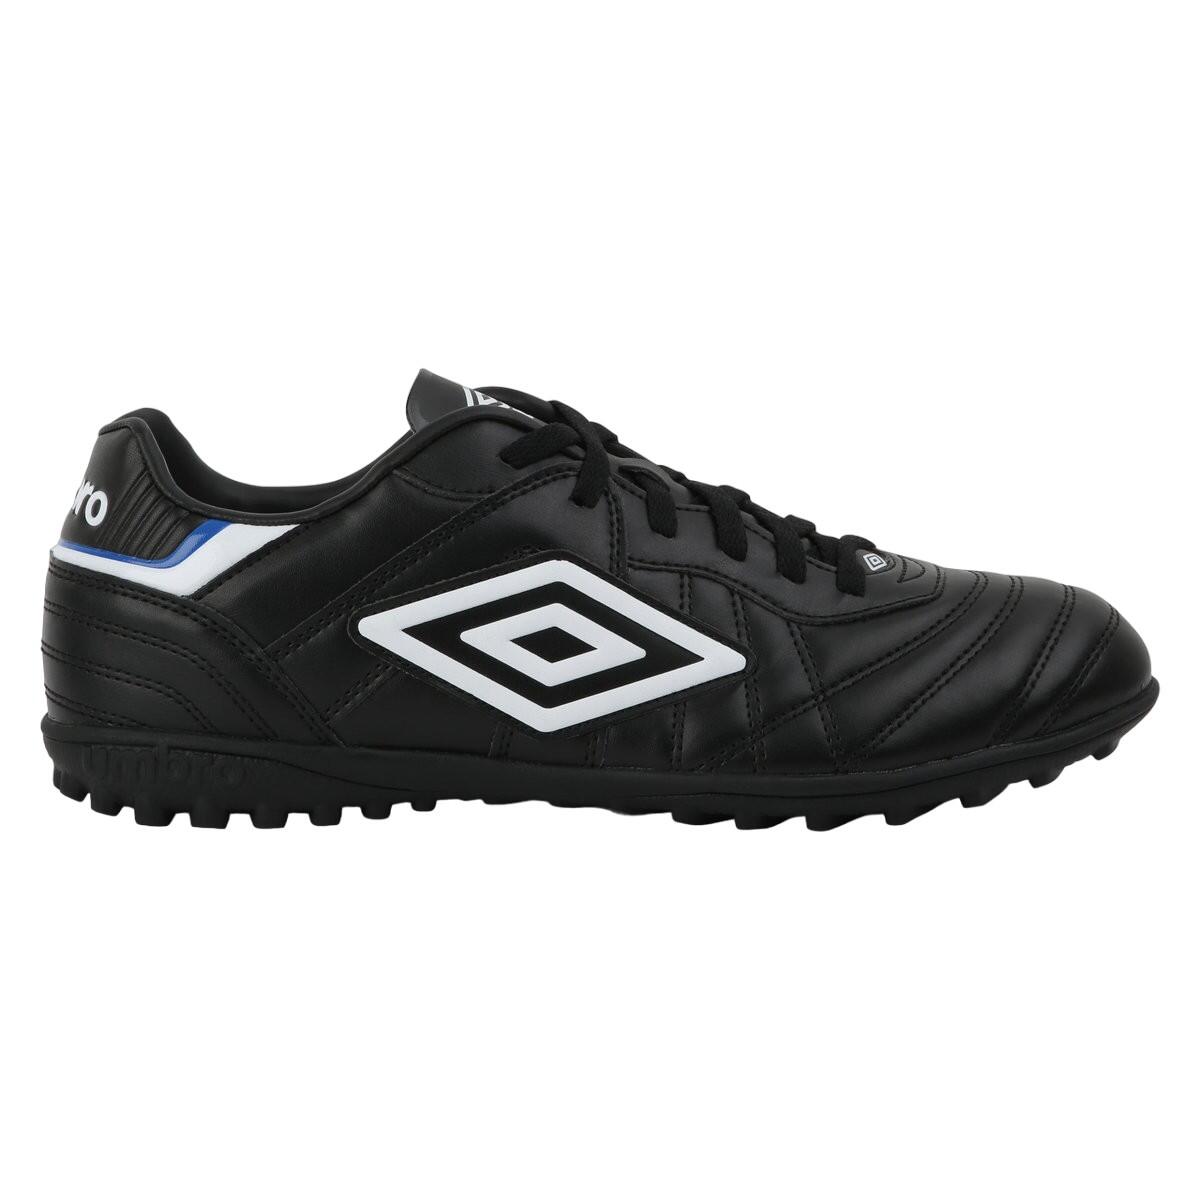 Mens Speciali Eternal Club Tf Leather Football Boots (Black/White/Royal Blue) 4/4